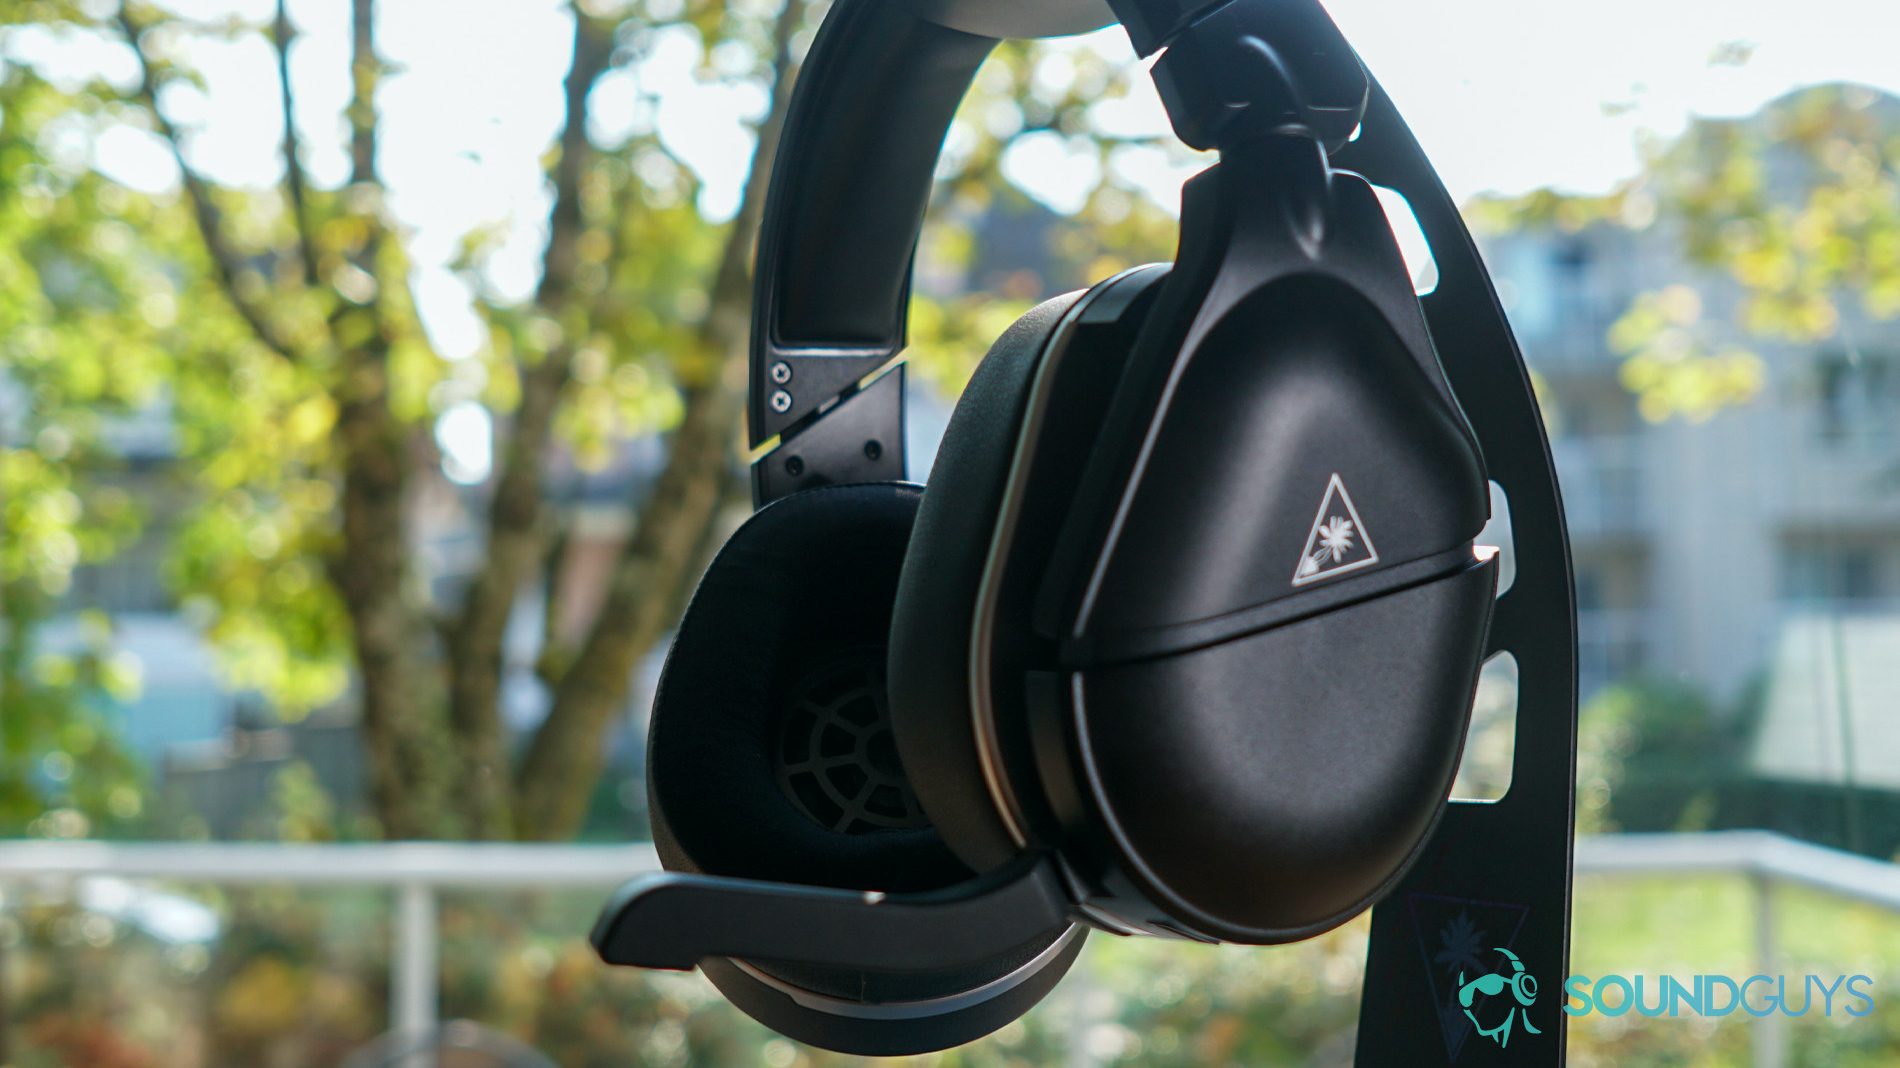 Turtle Beach Stealth Pro Feature Overview 